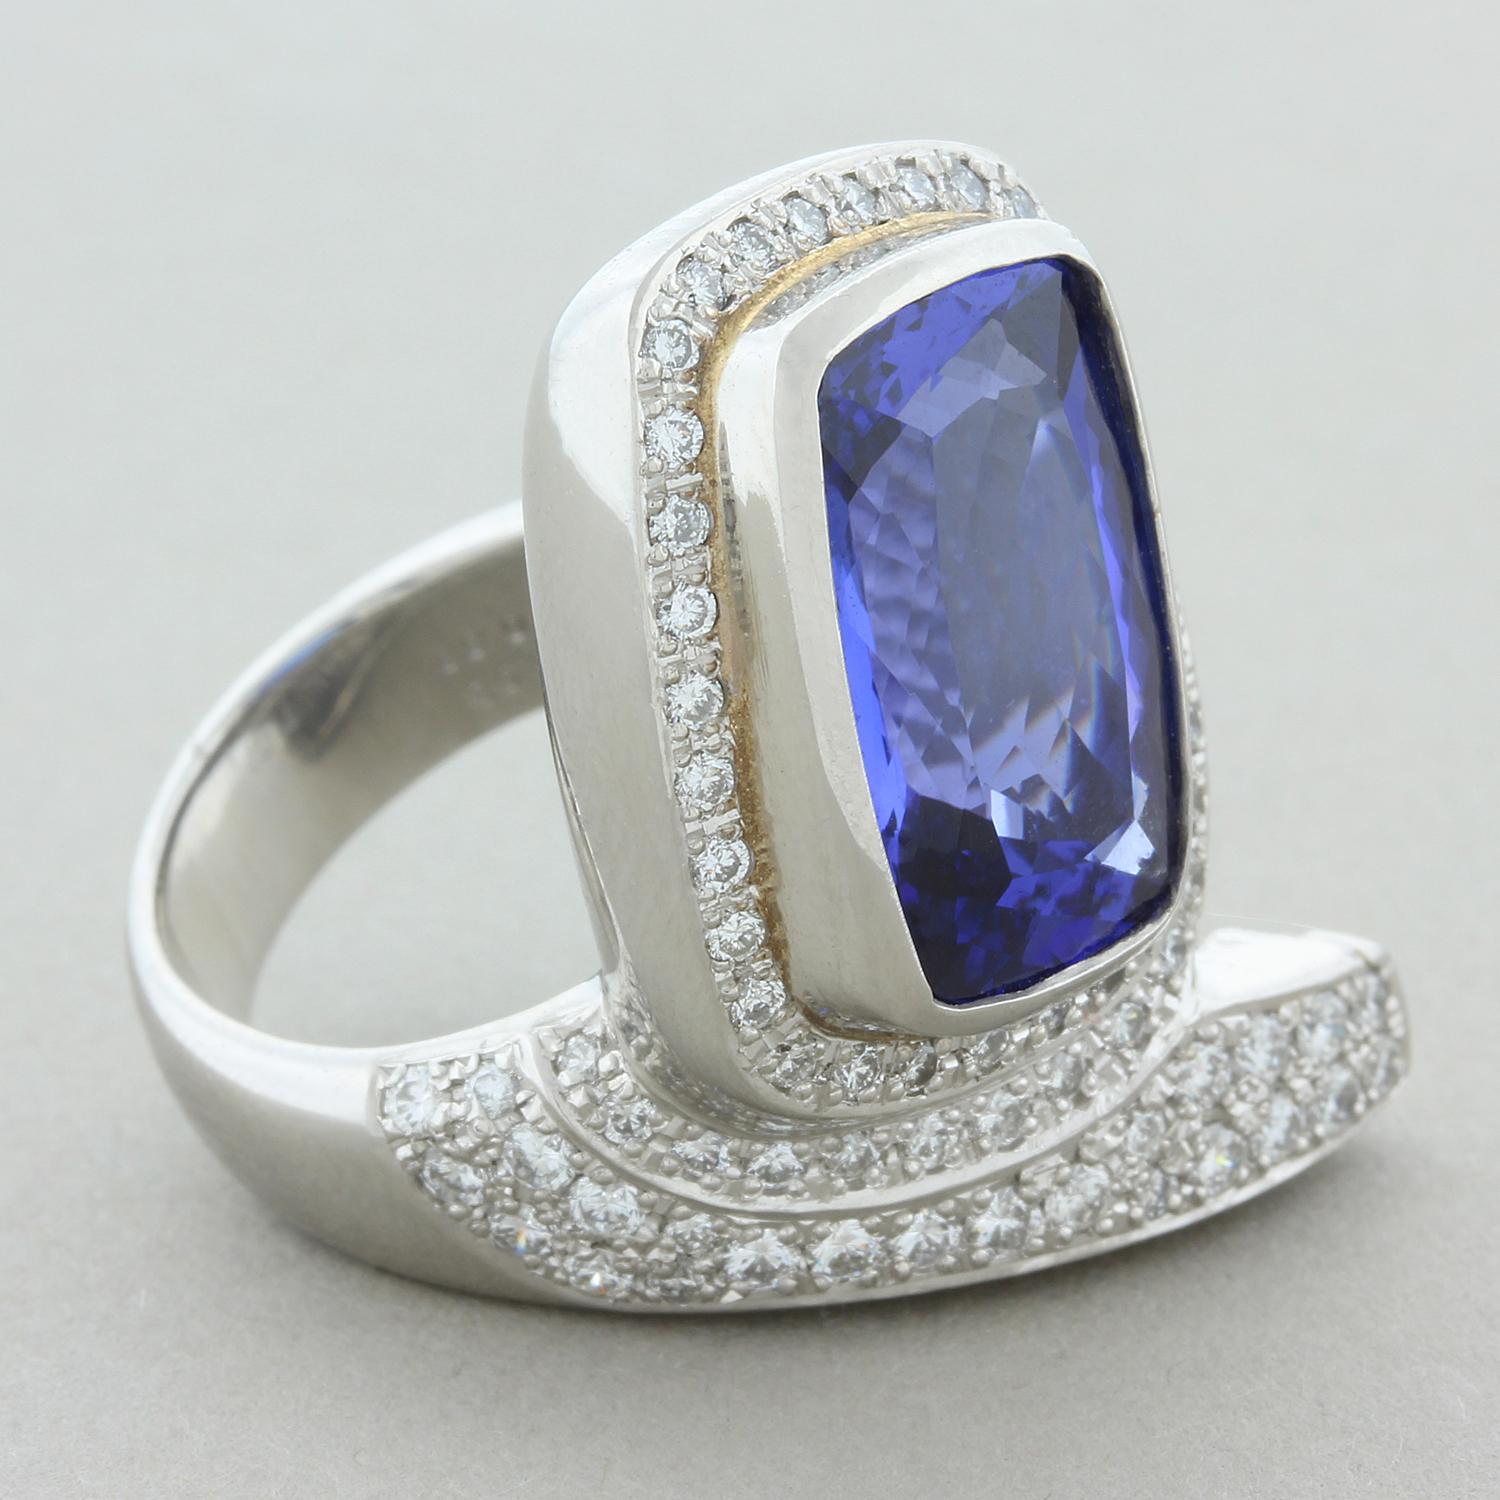 A dazzlingly unique ring featuring an 8.93 carat tanzanite which is haloed and accented by round brilliant cut diamonds totaling 0.88 carats. The bezel set tanzanite is in a platinum setting with its own stand showcasing the radiant cut